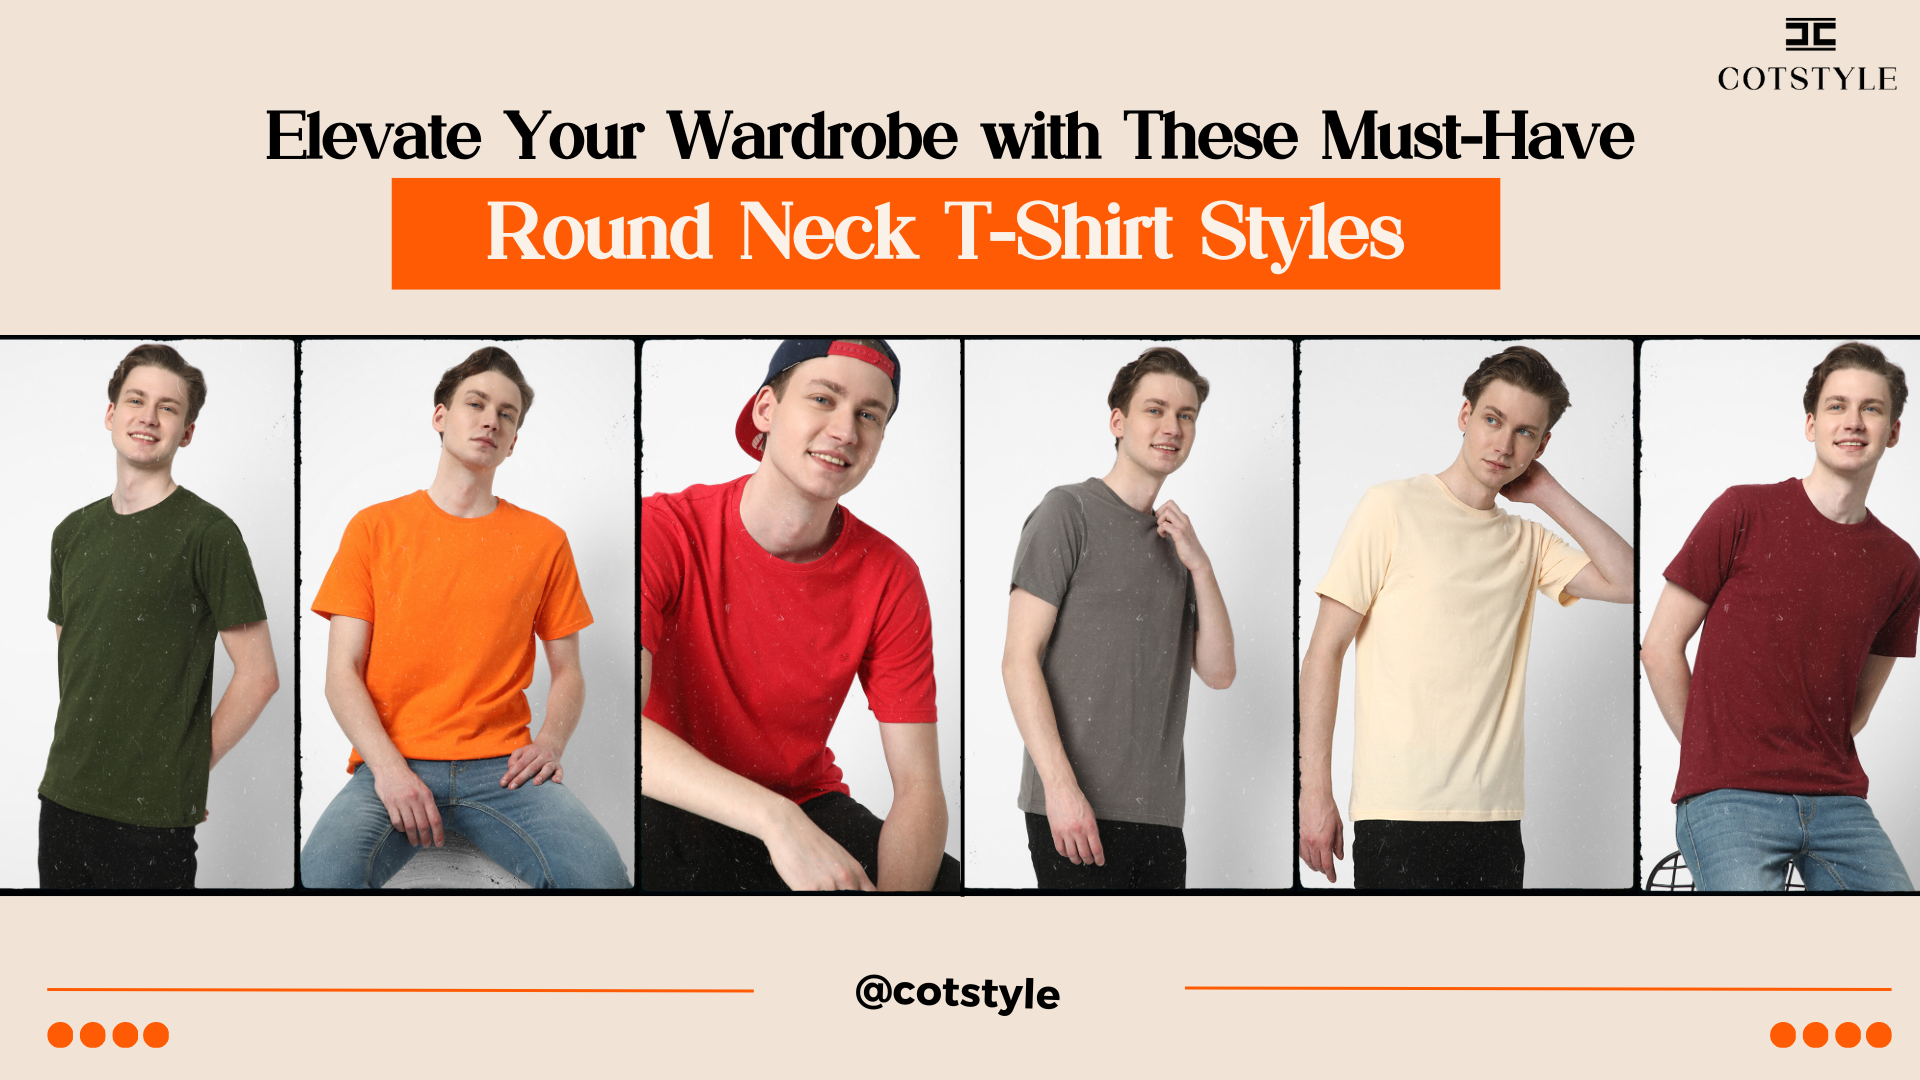 Elevate Your Wardrobe with These Must-have Round Neck T-shirt Styles